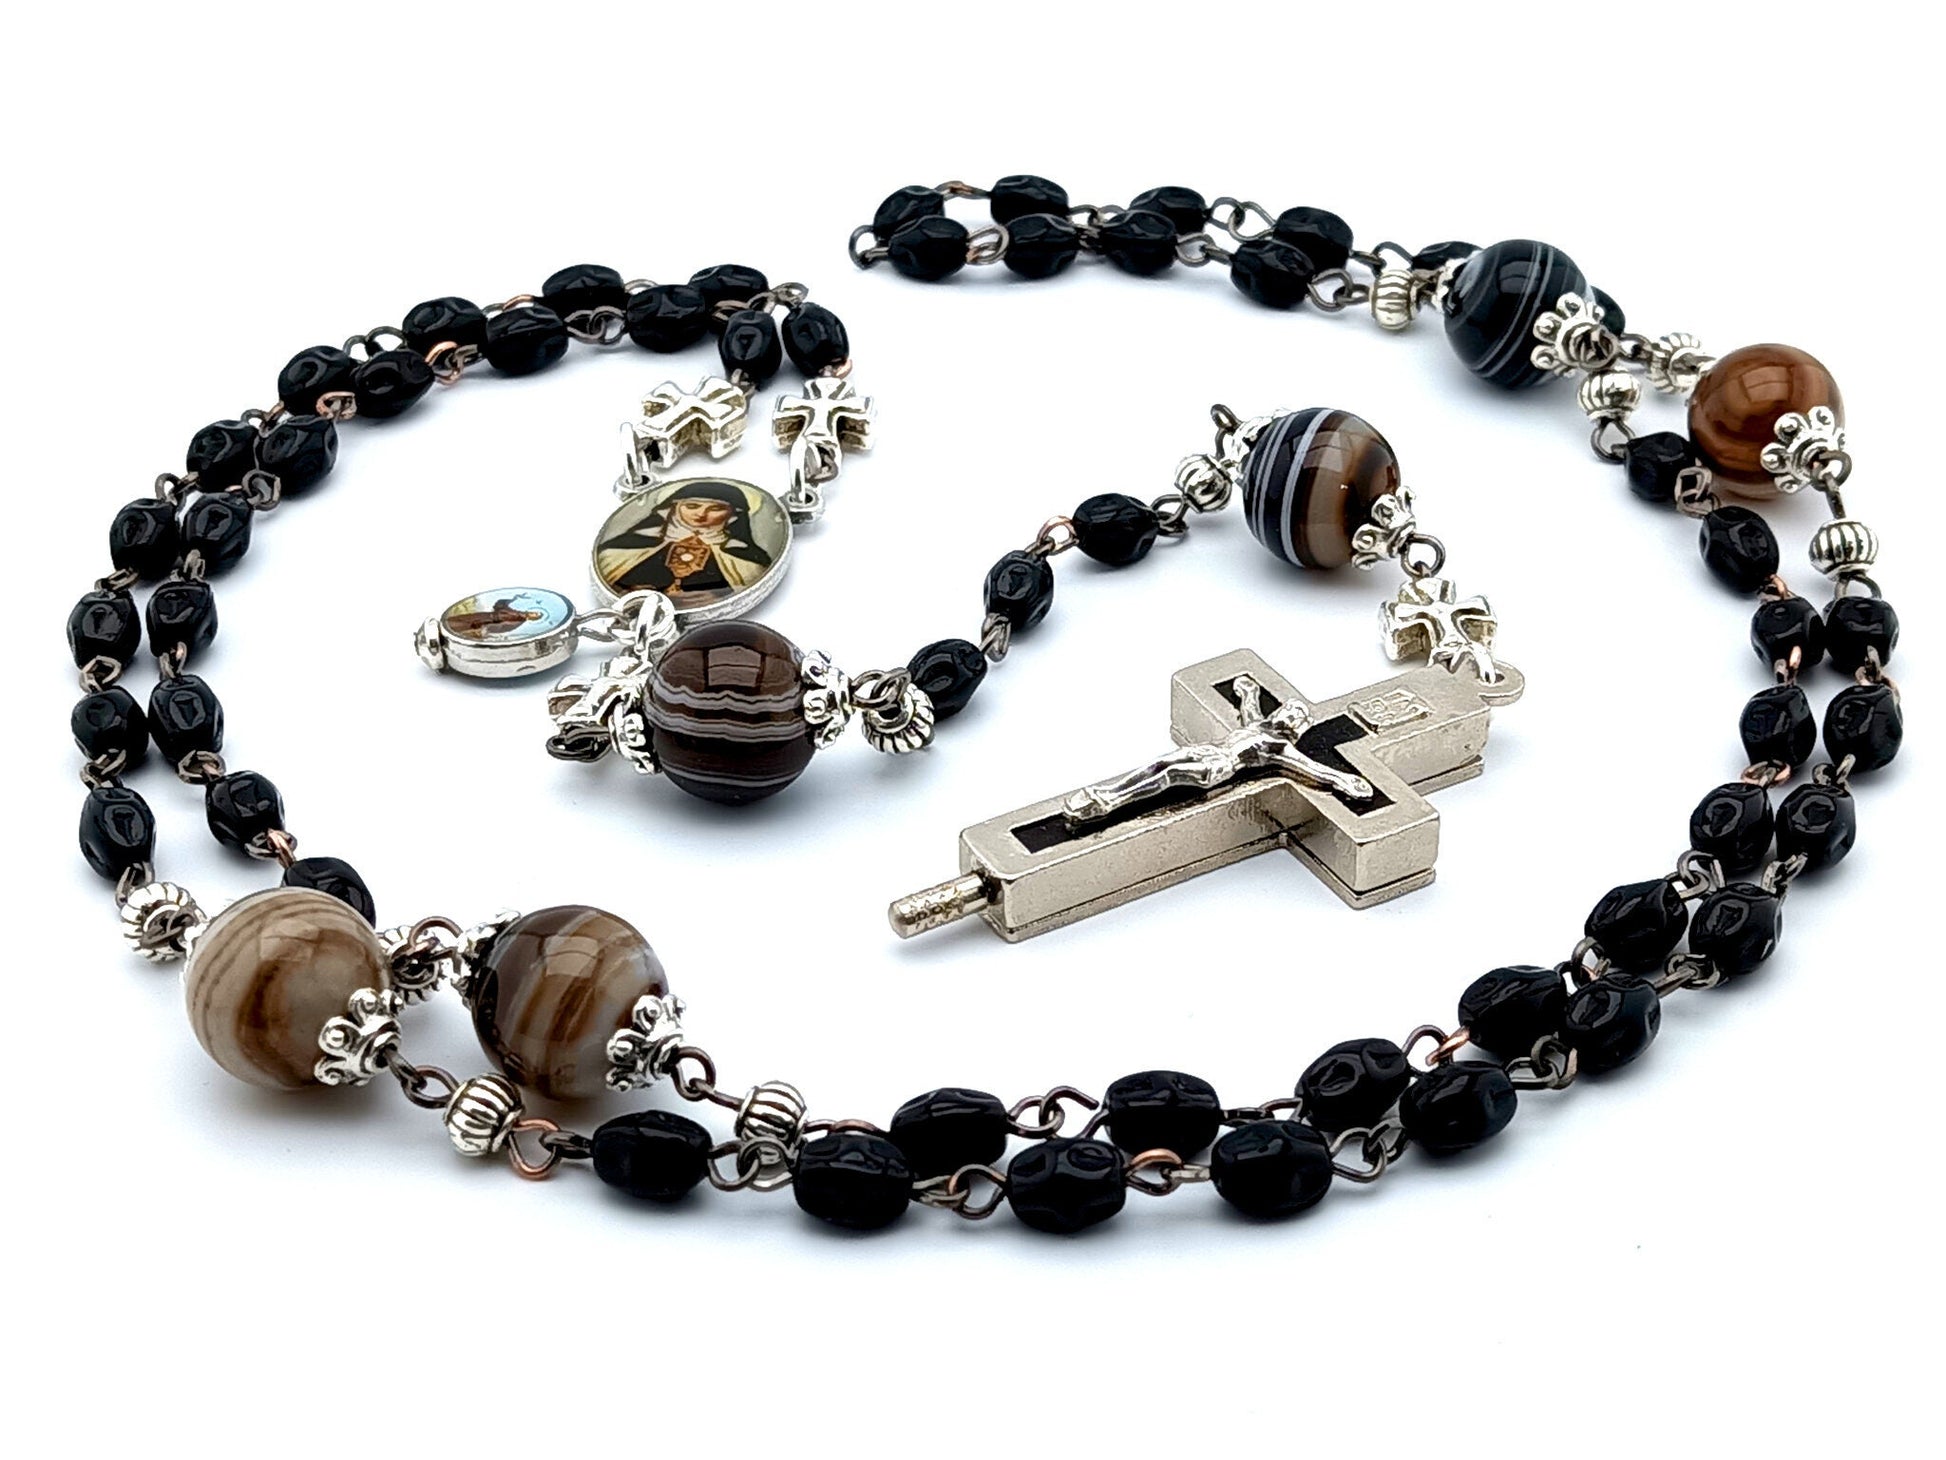 Saint Clare of Assisi unique rosary beads with black nugget glass beads, relic holder crucifix, picture centre medal and brown striped agate gemstone pater beads.